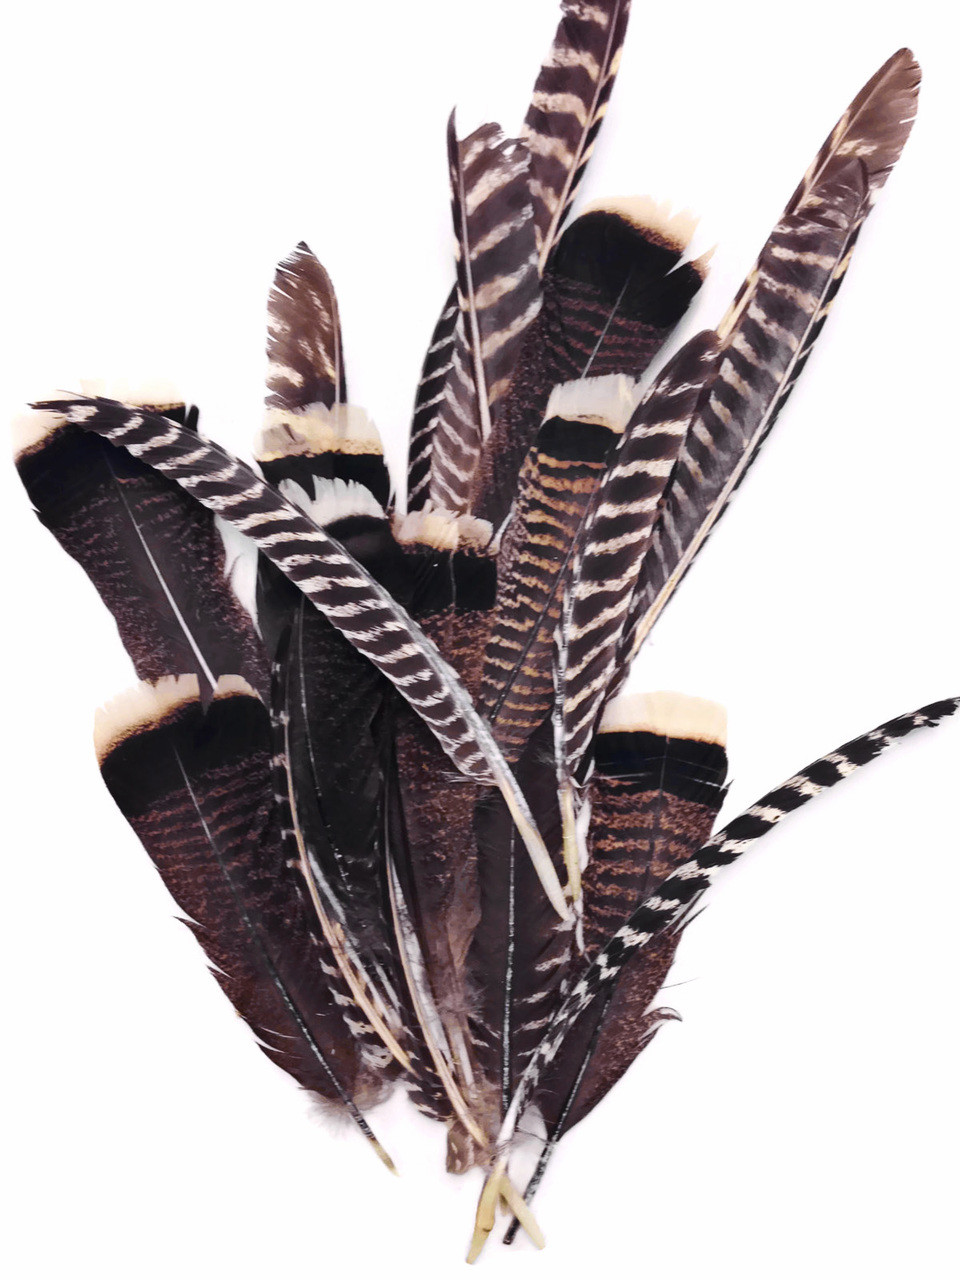 1/4 Lb - Brown Turkey Tom Rounds Secondary Wing Quill Right Facing  Wholesale Feathers (Bulk) Halloween Wedding Craft Supply | Moonlight Feather